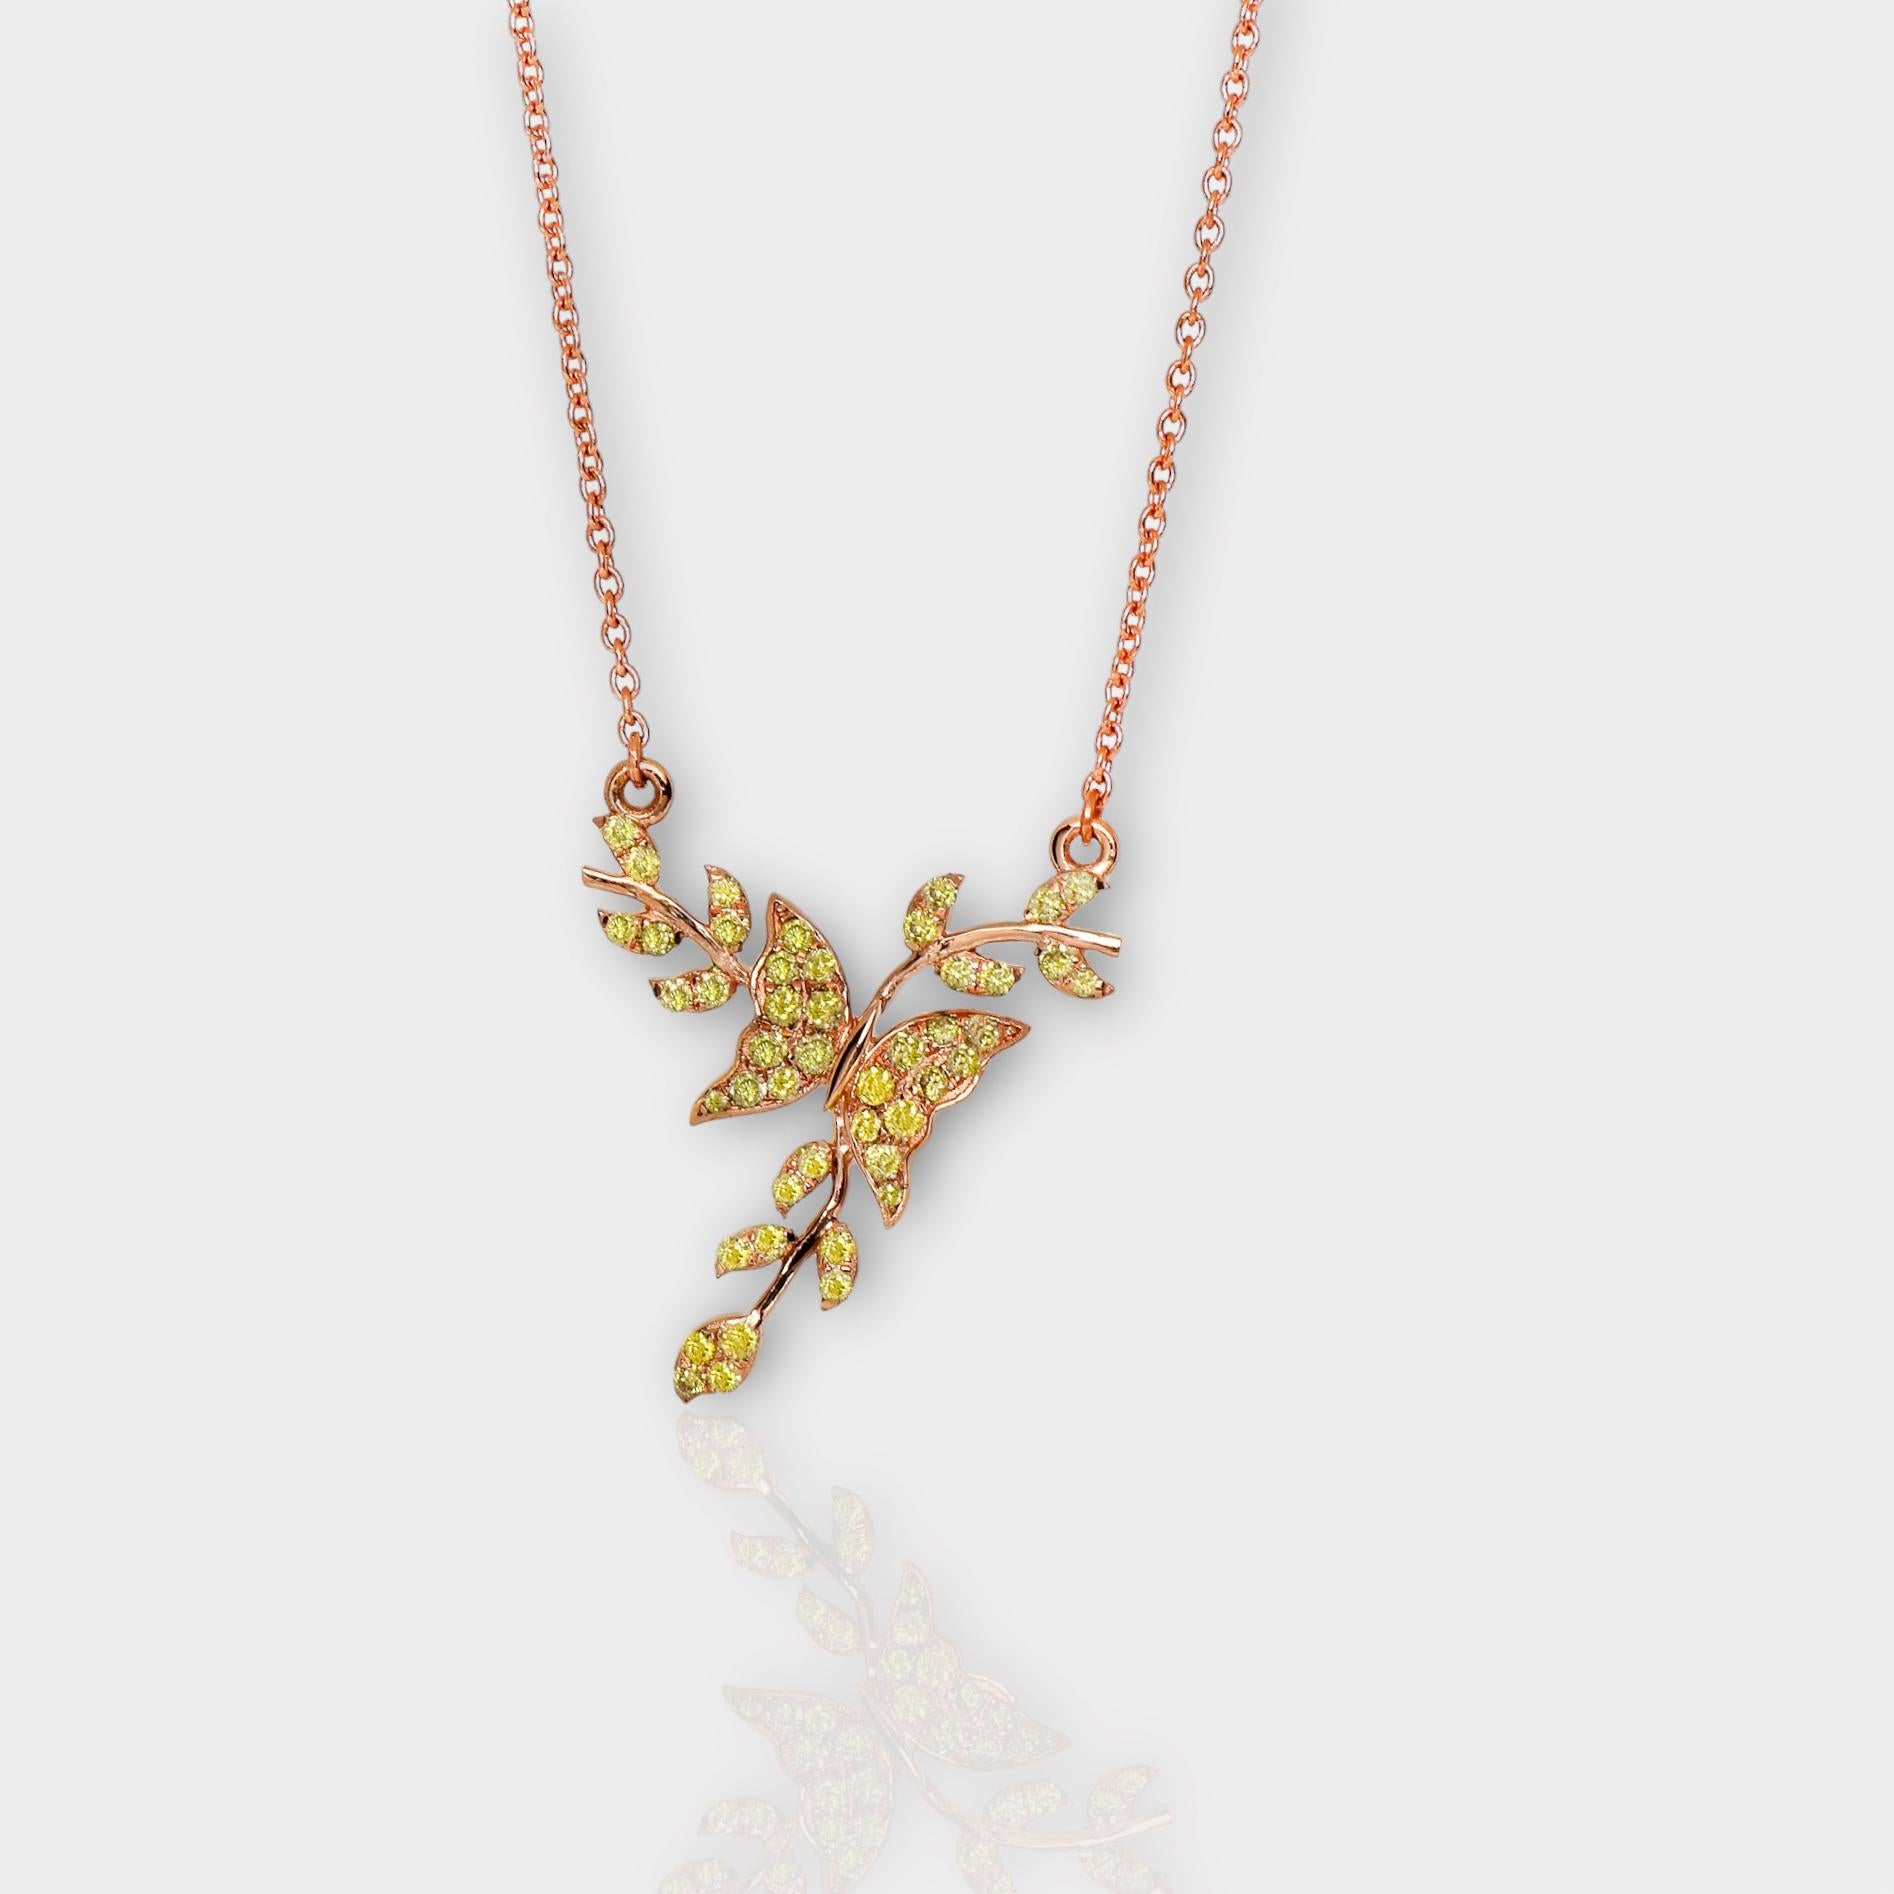 *IGI 14K 0.25 ct Natural Greenish Yellow Diamonds Branches Design Necklace*

This band features a stunning design with branches crafted from 14K rose gold. It is set with natural, intense greenish-yellow diamonds weighing 0.25 carats.

This necklace